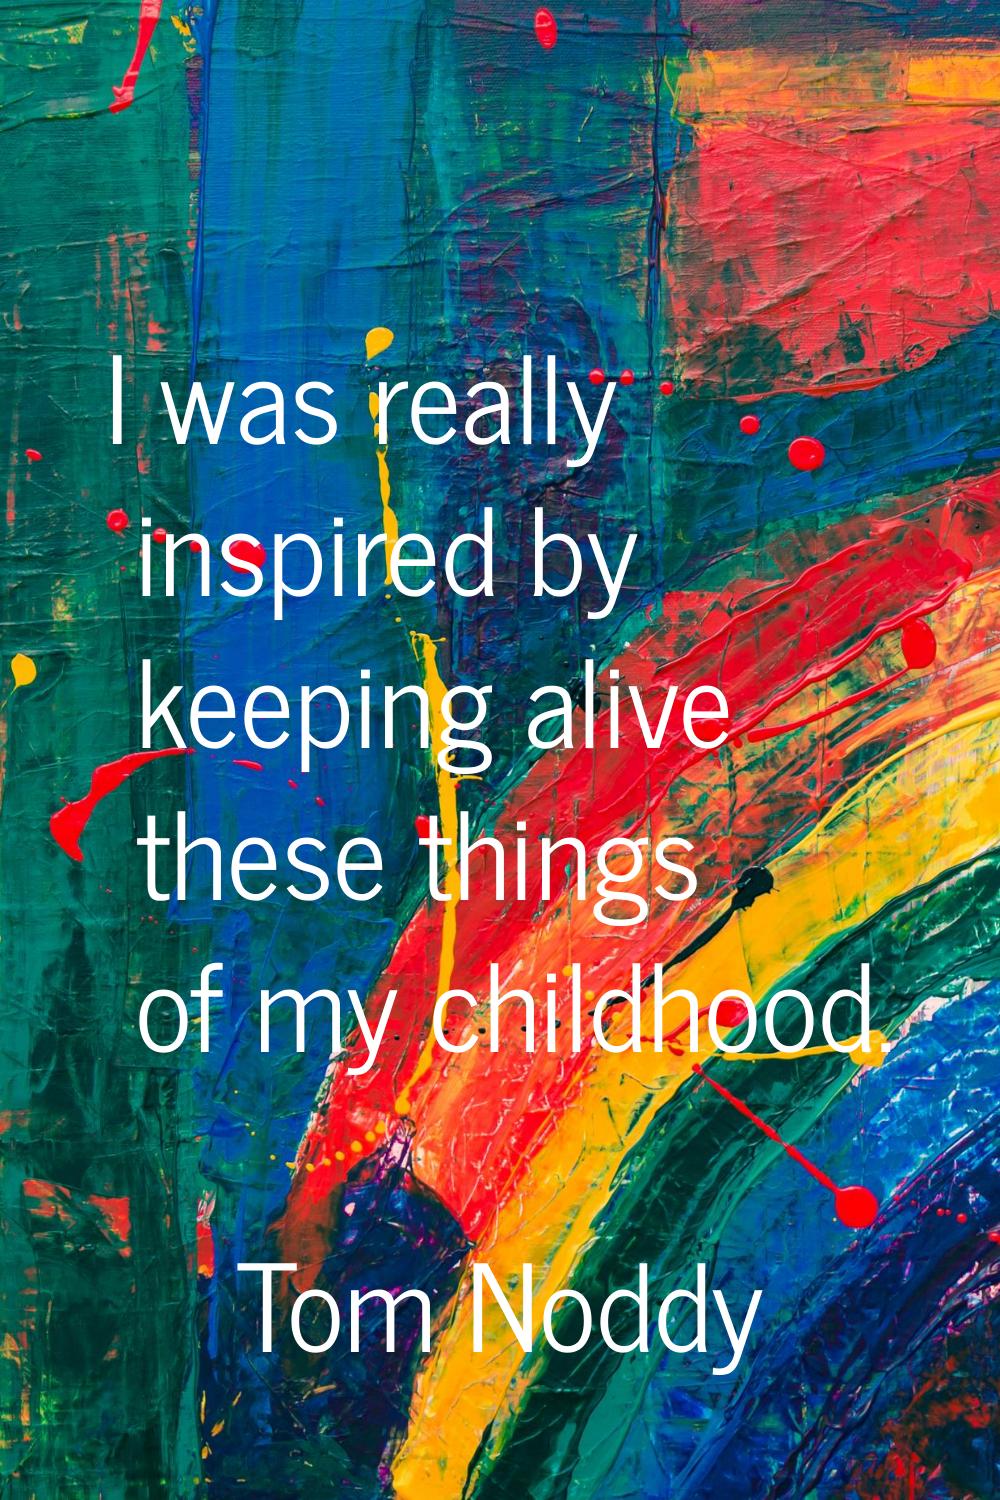 I was really inspired by keeping alive these things of my childhood.